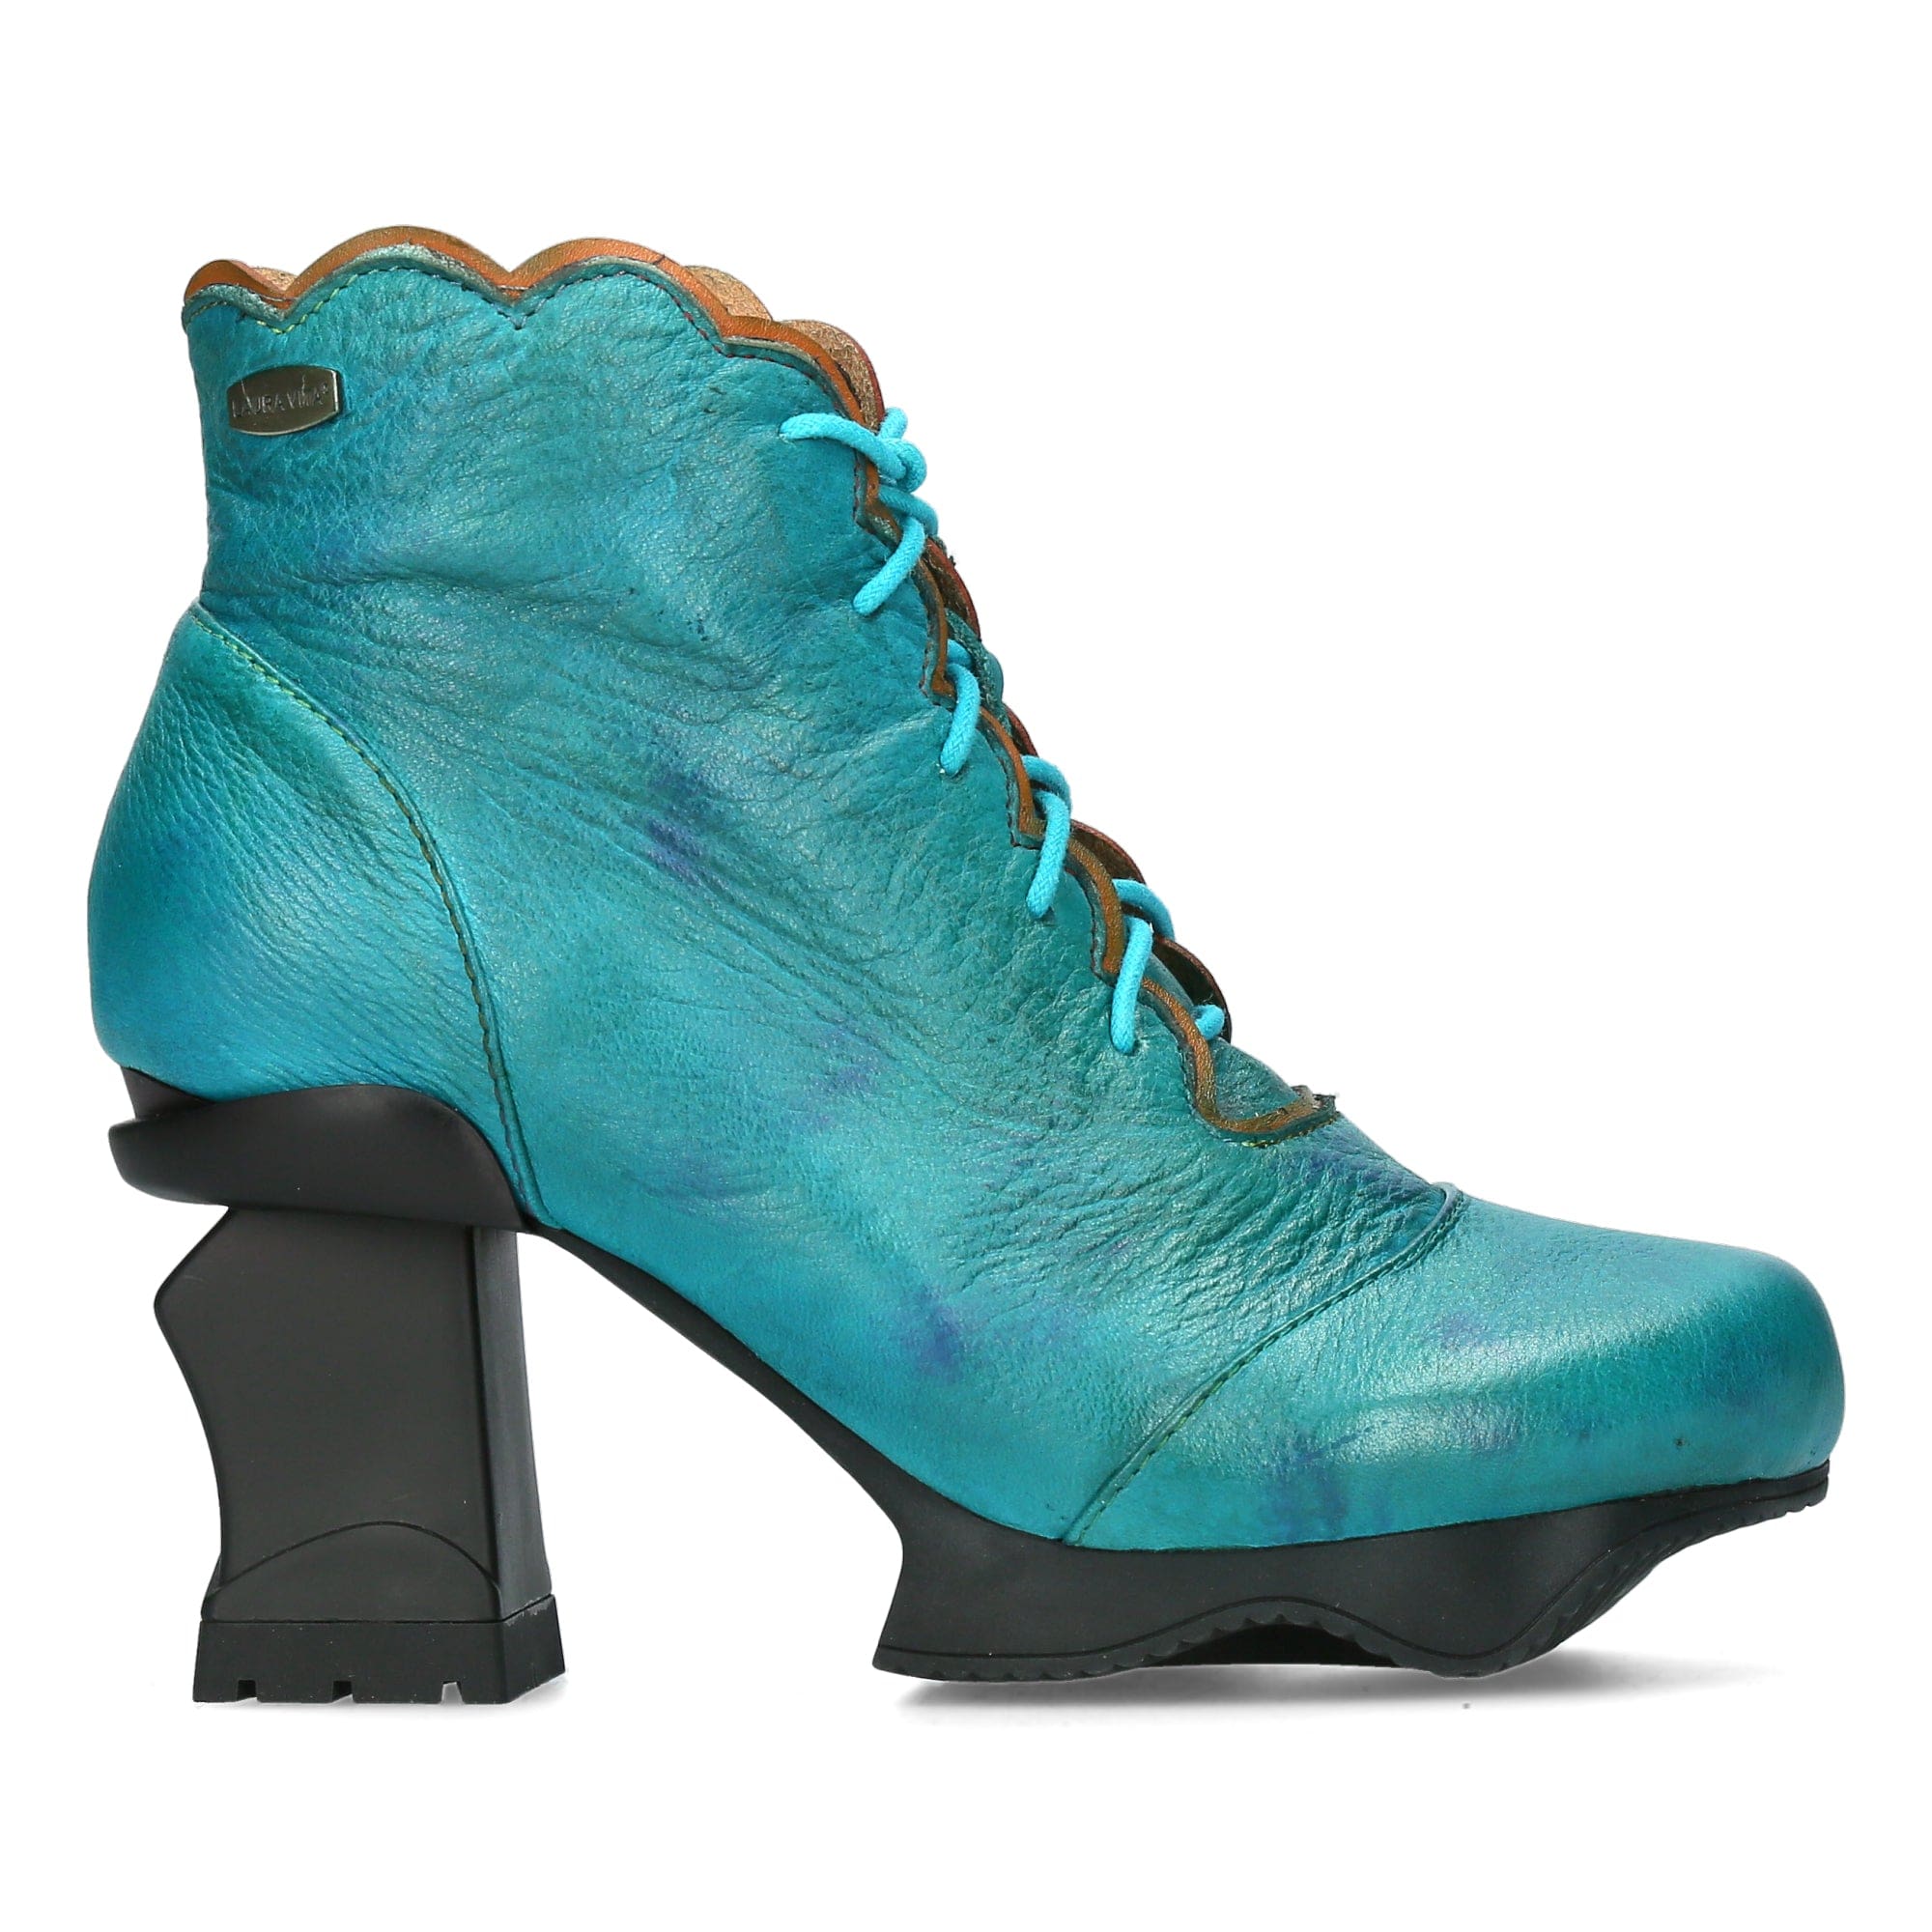 FRCIDAO 223 - 35 / Turquoise Boots